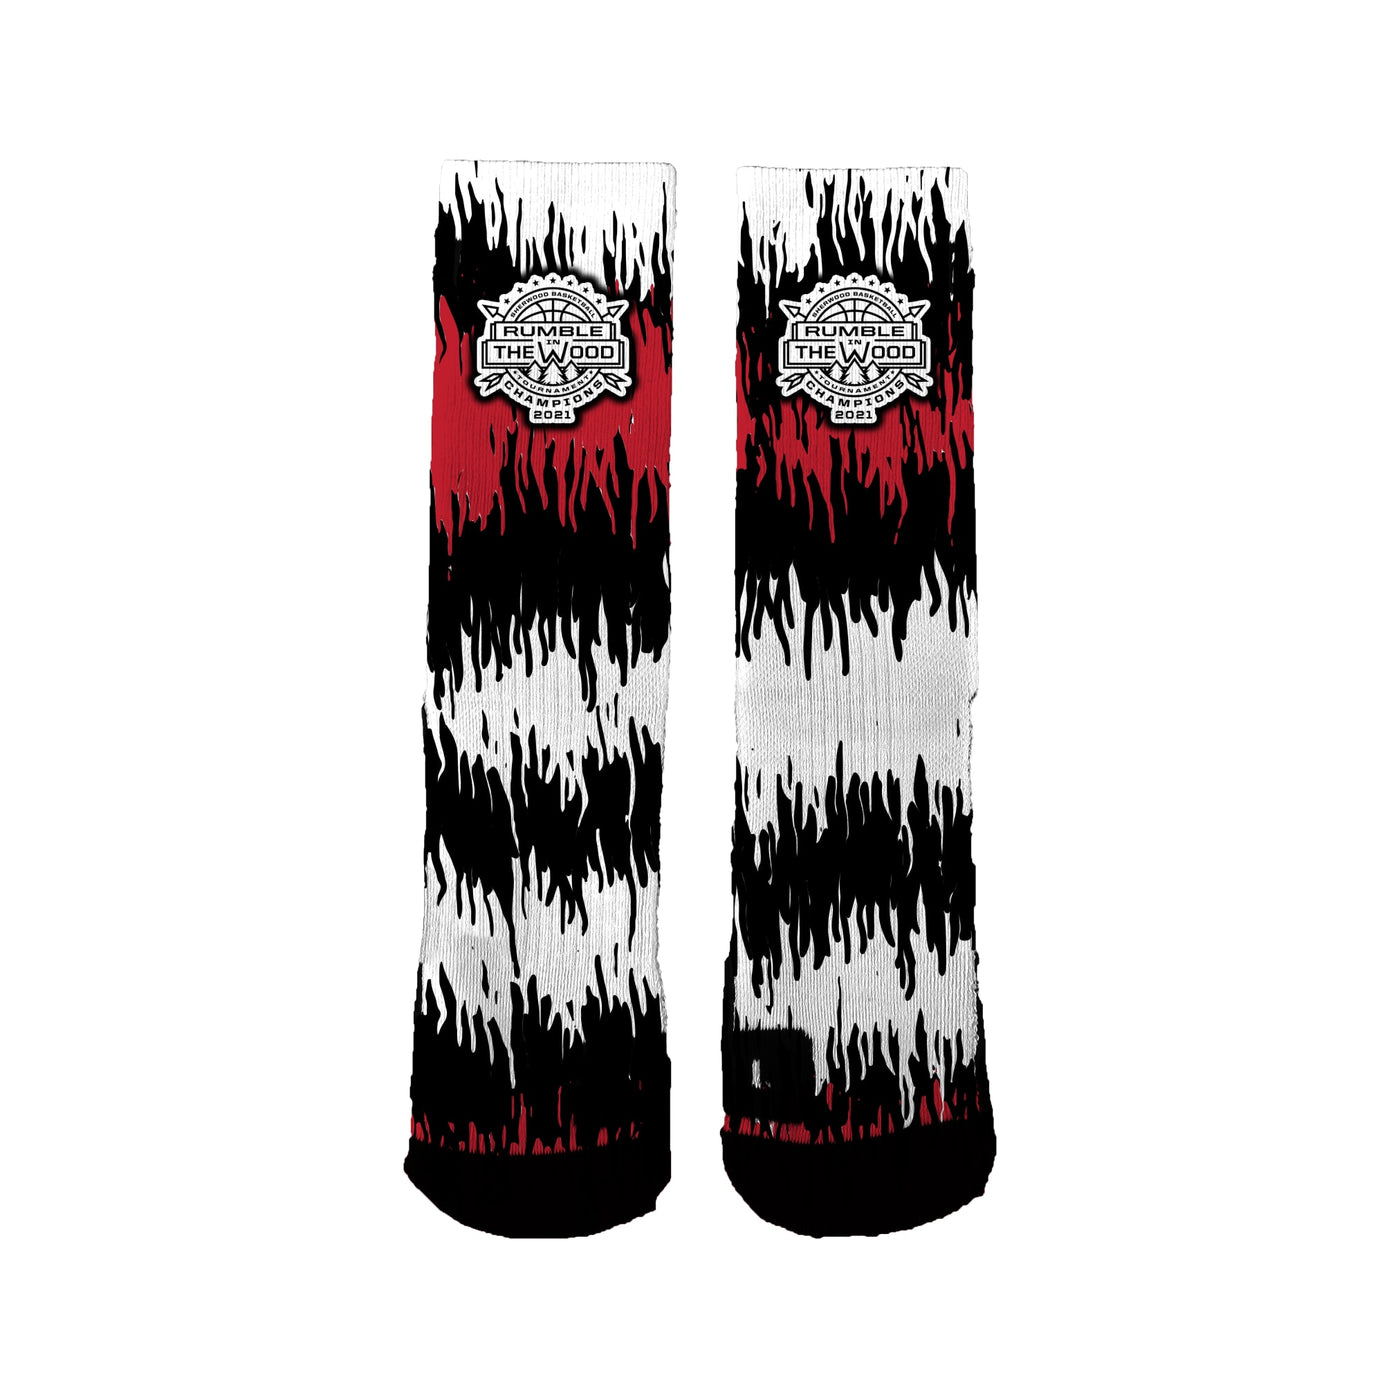 Rumble In The Wood Champion Scribbles Socks